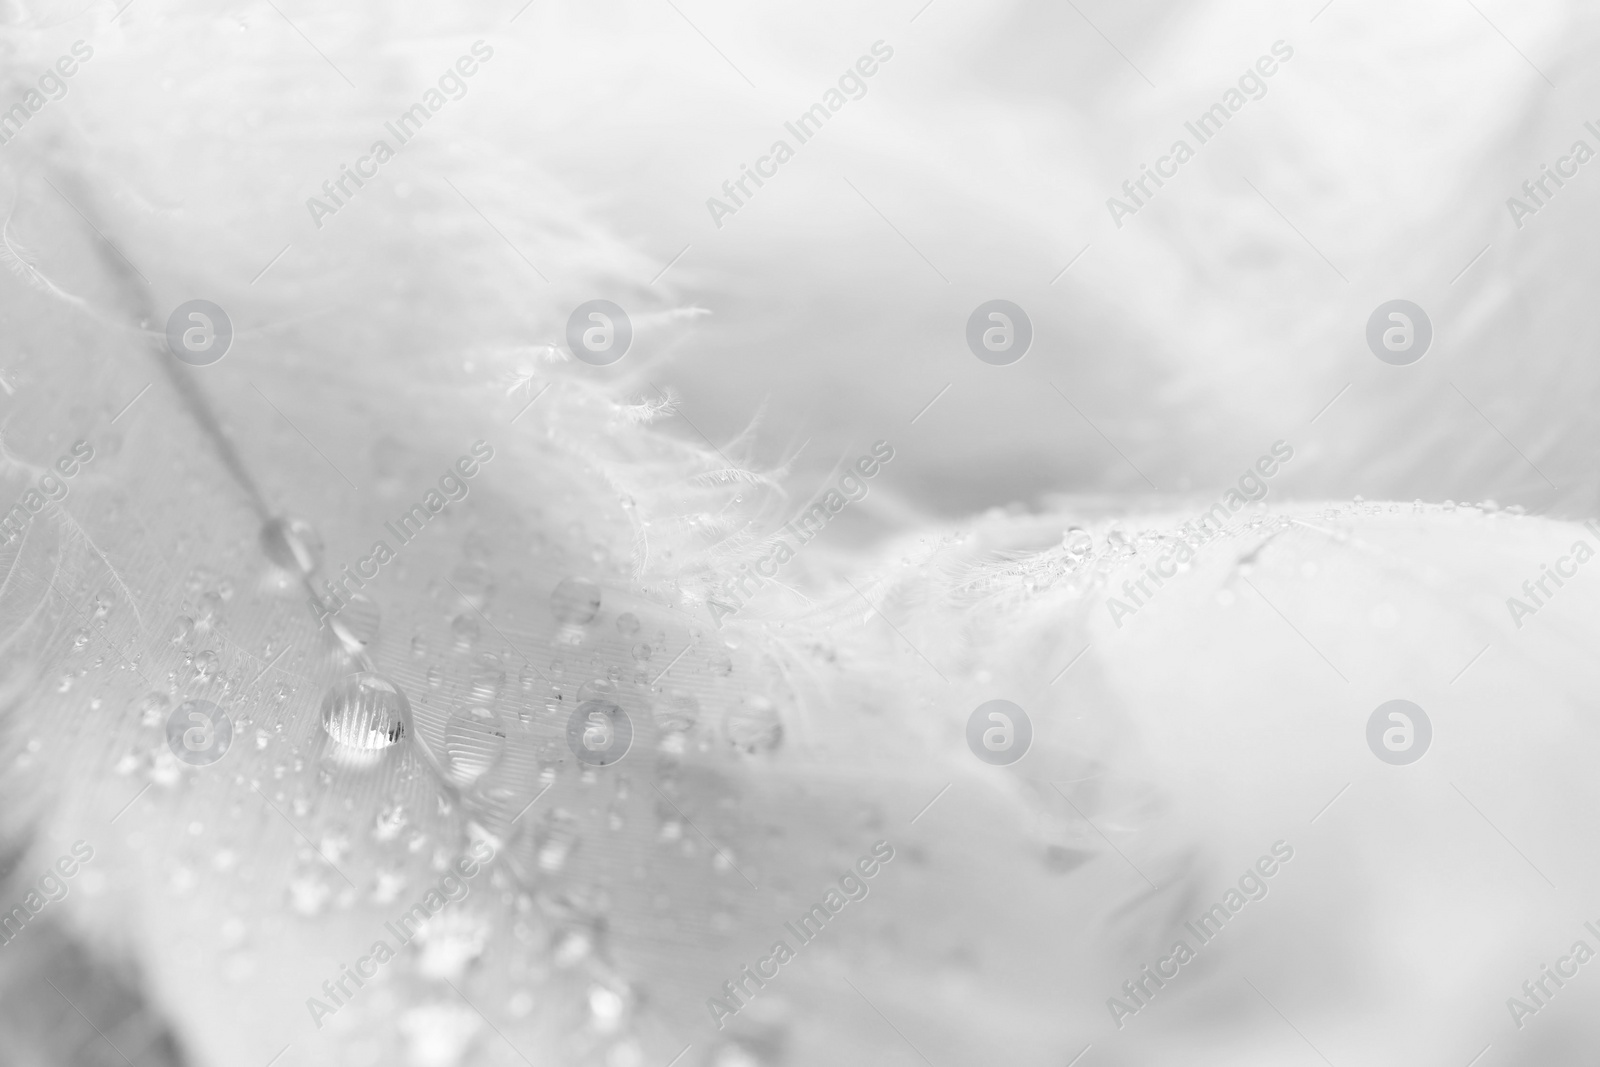 Photo of Fluffy white feathers with water drops as background, closeup